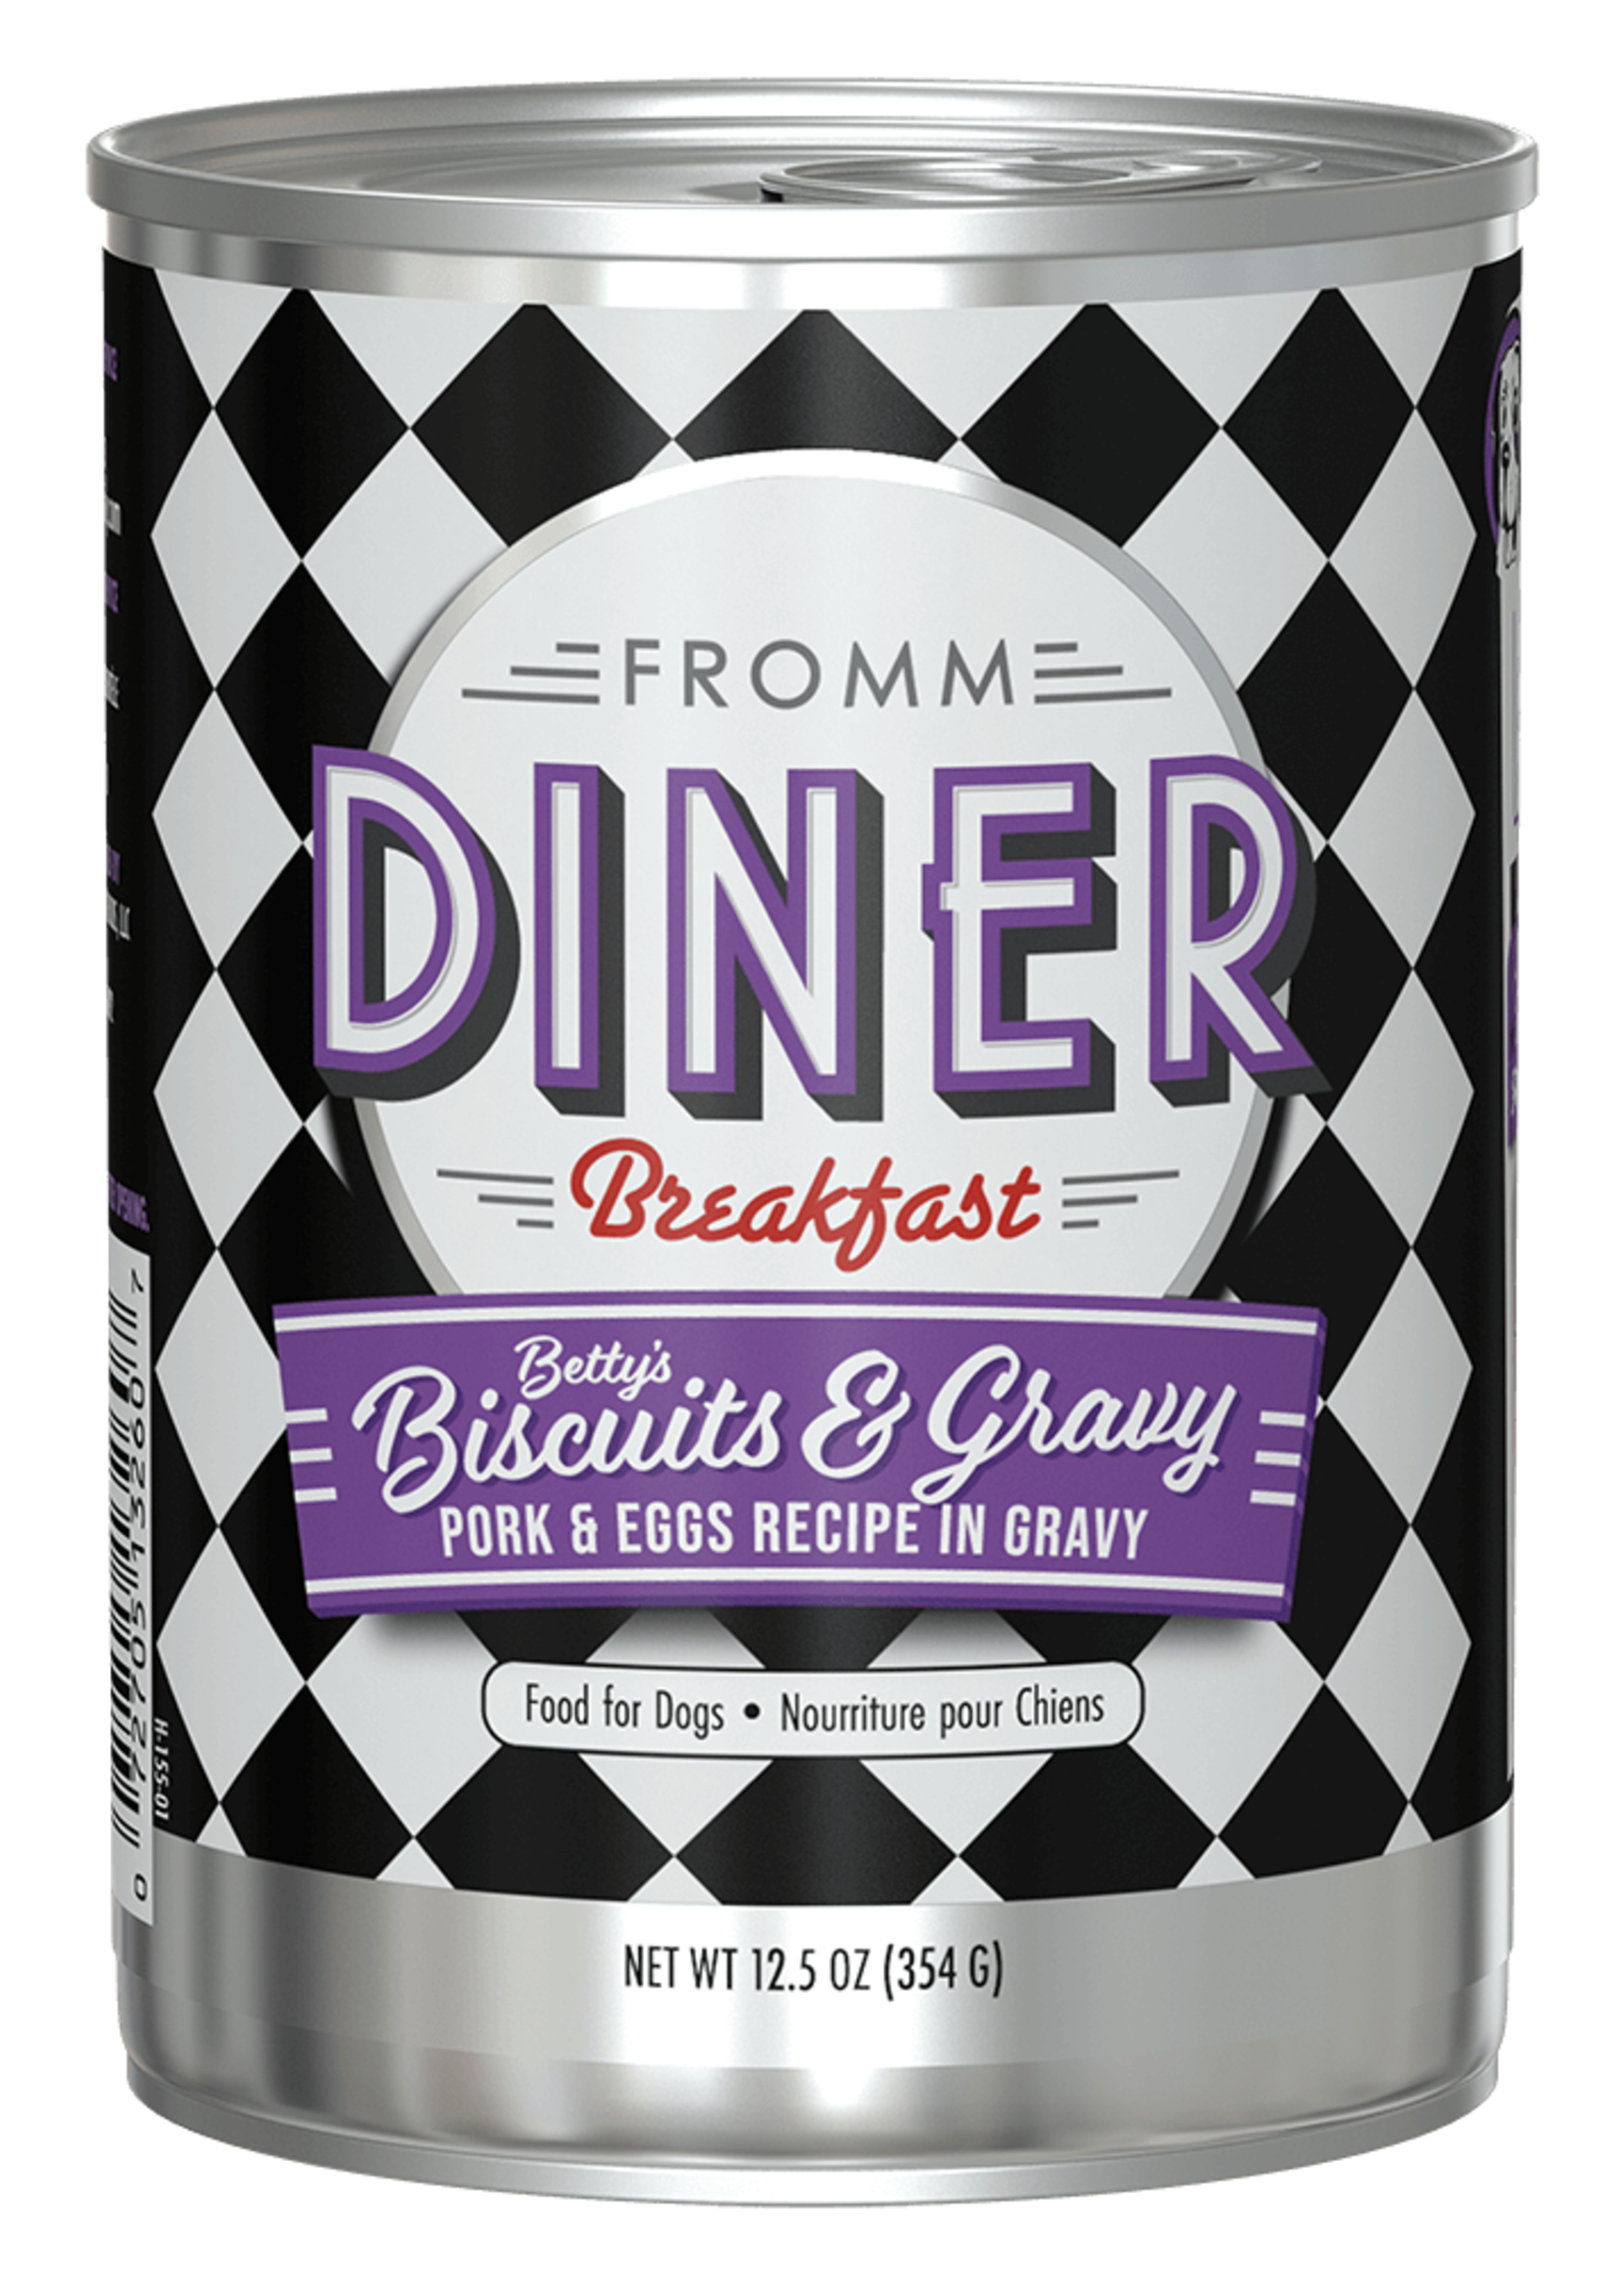 Fromm Family Pet Food Fromm Dog Diner Breakfast Betty's Biscuits & Gravy 12/12.5oz